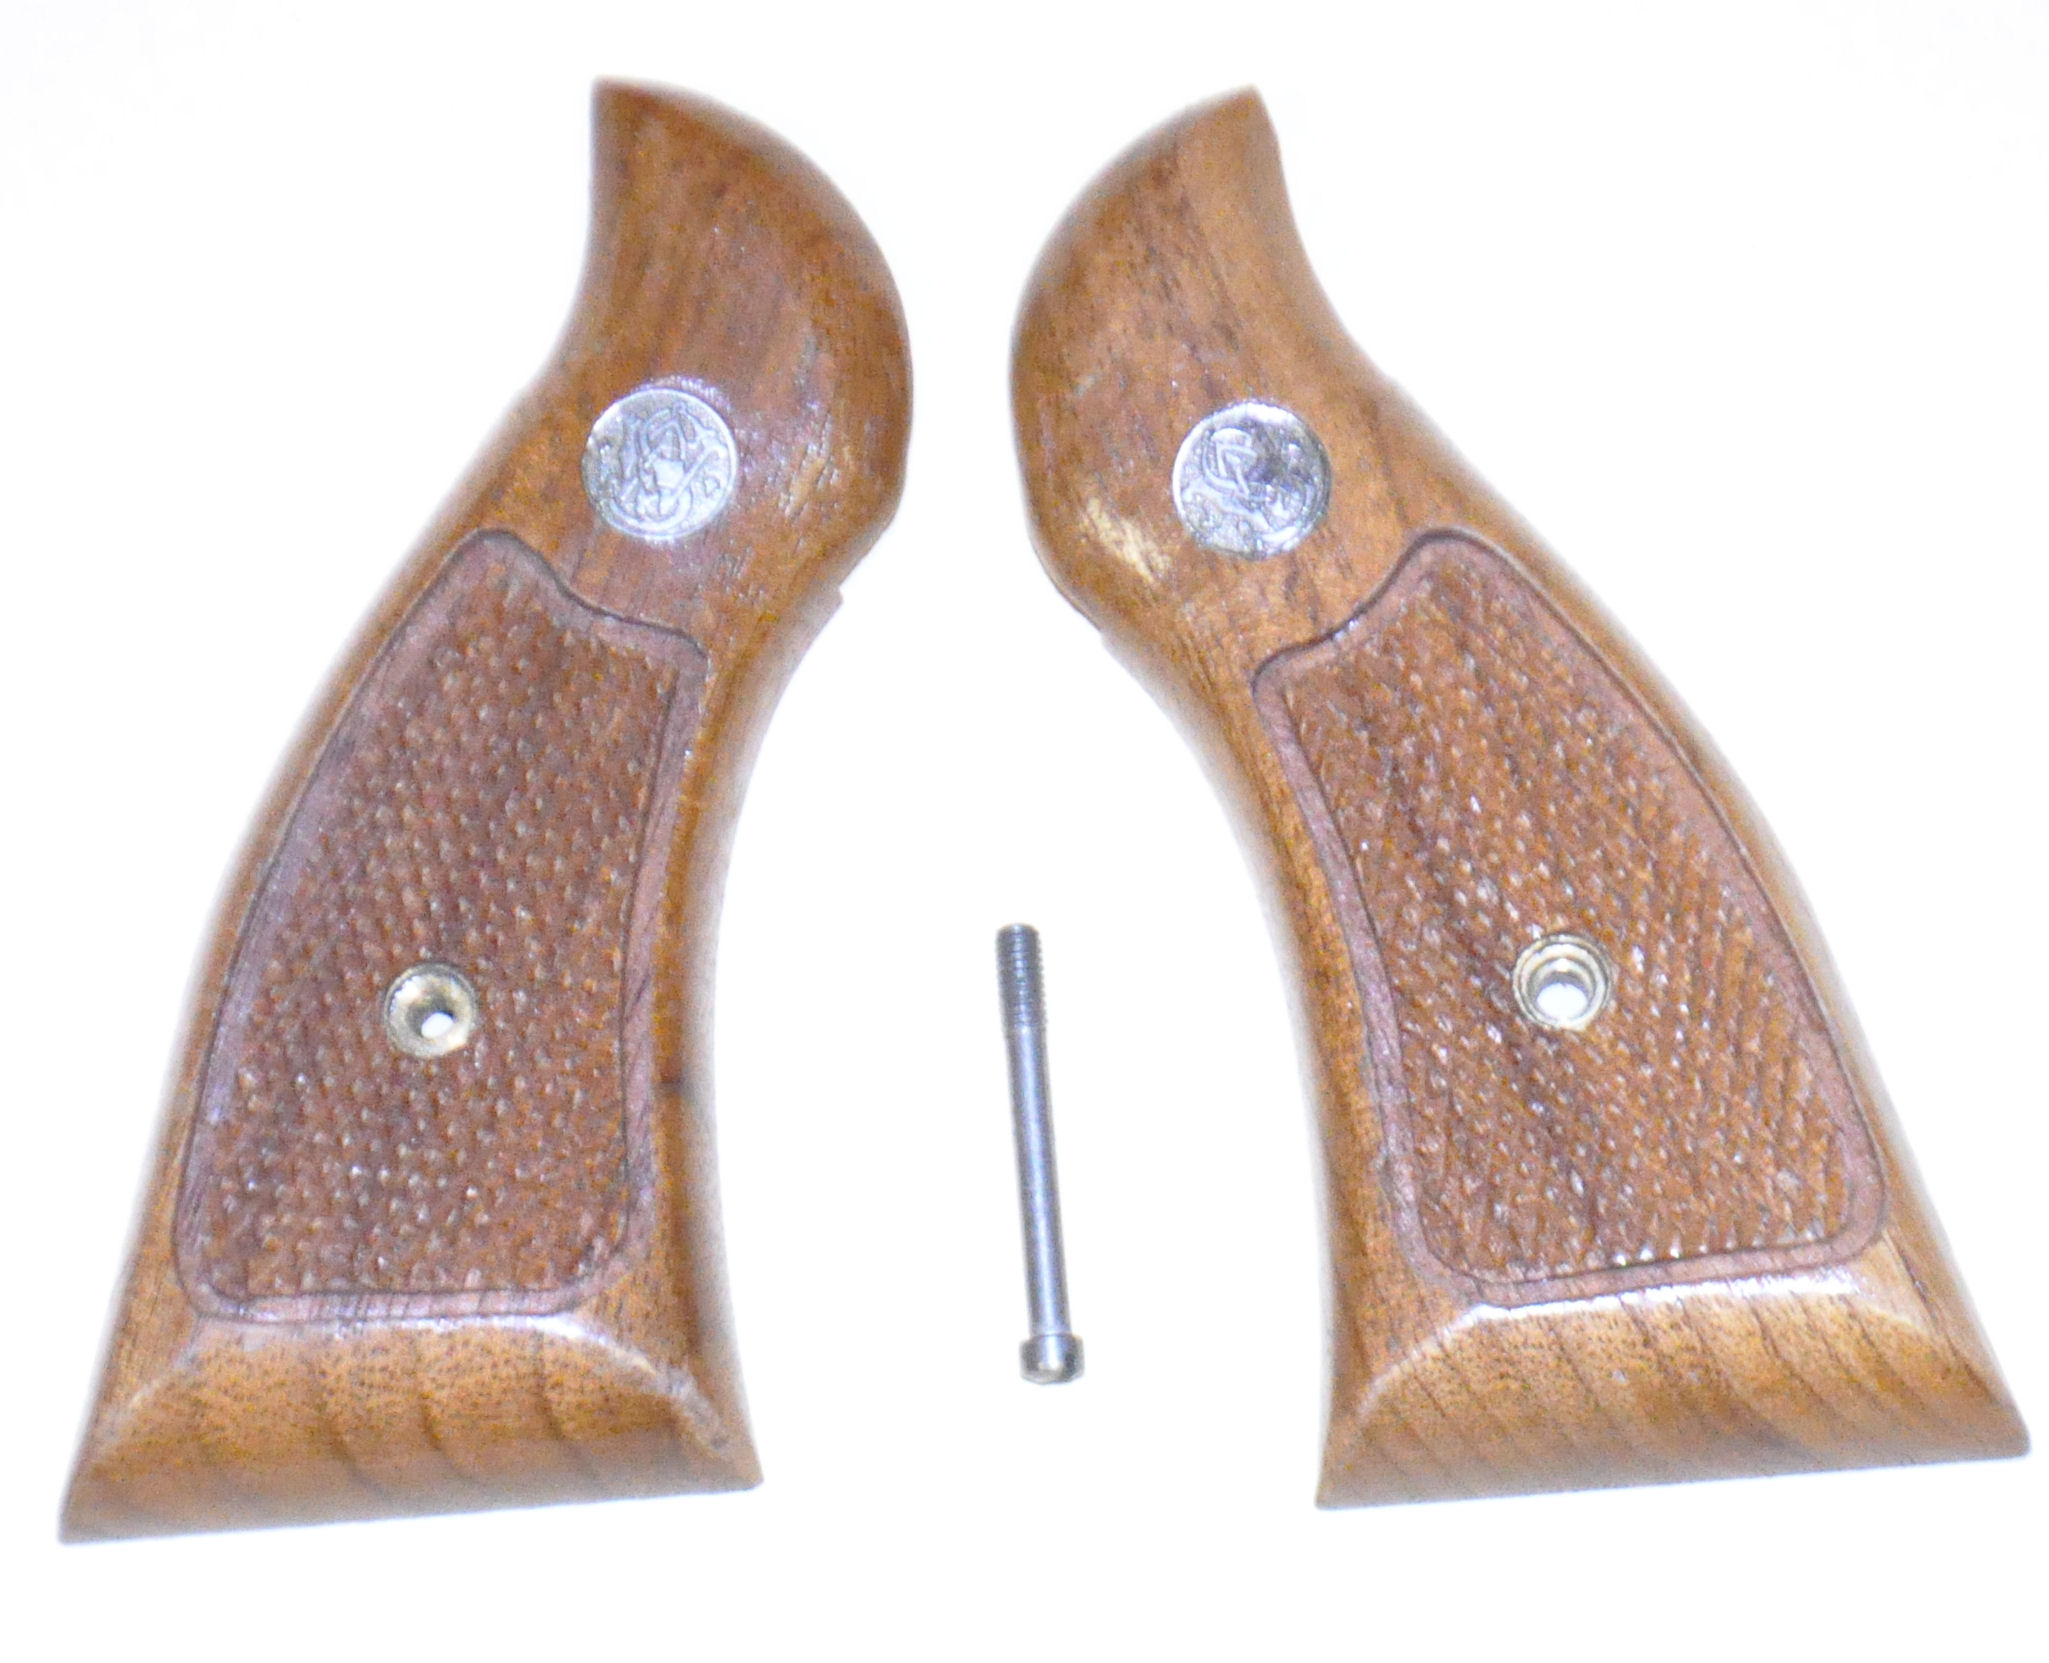 S&W K&L Square Butt original grips (rounded)